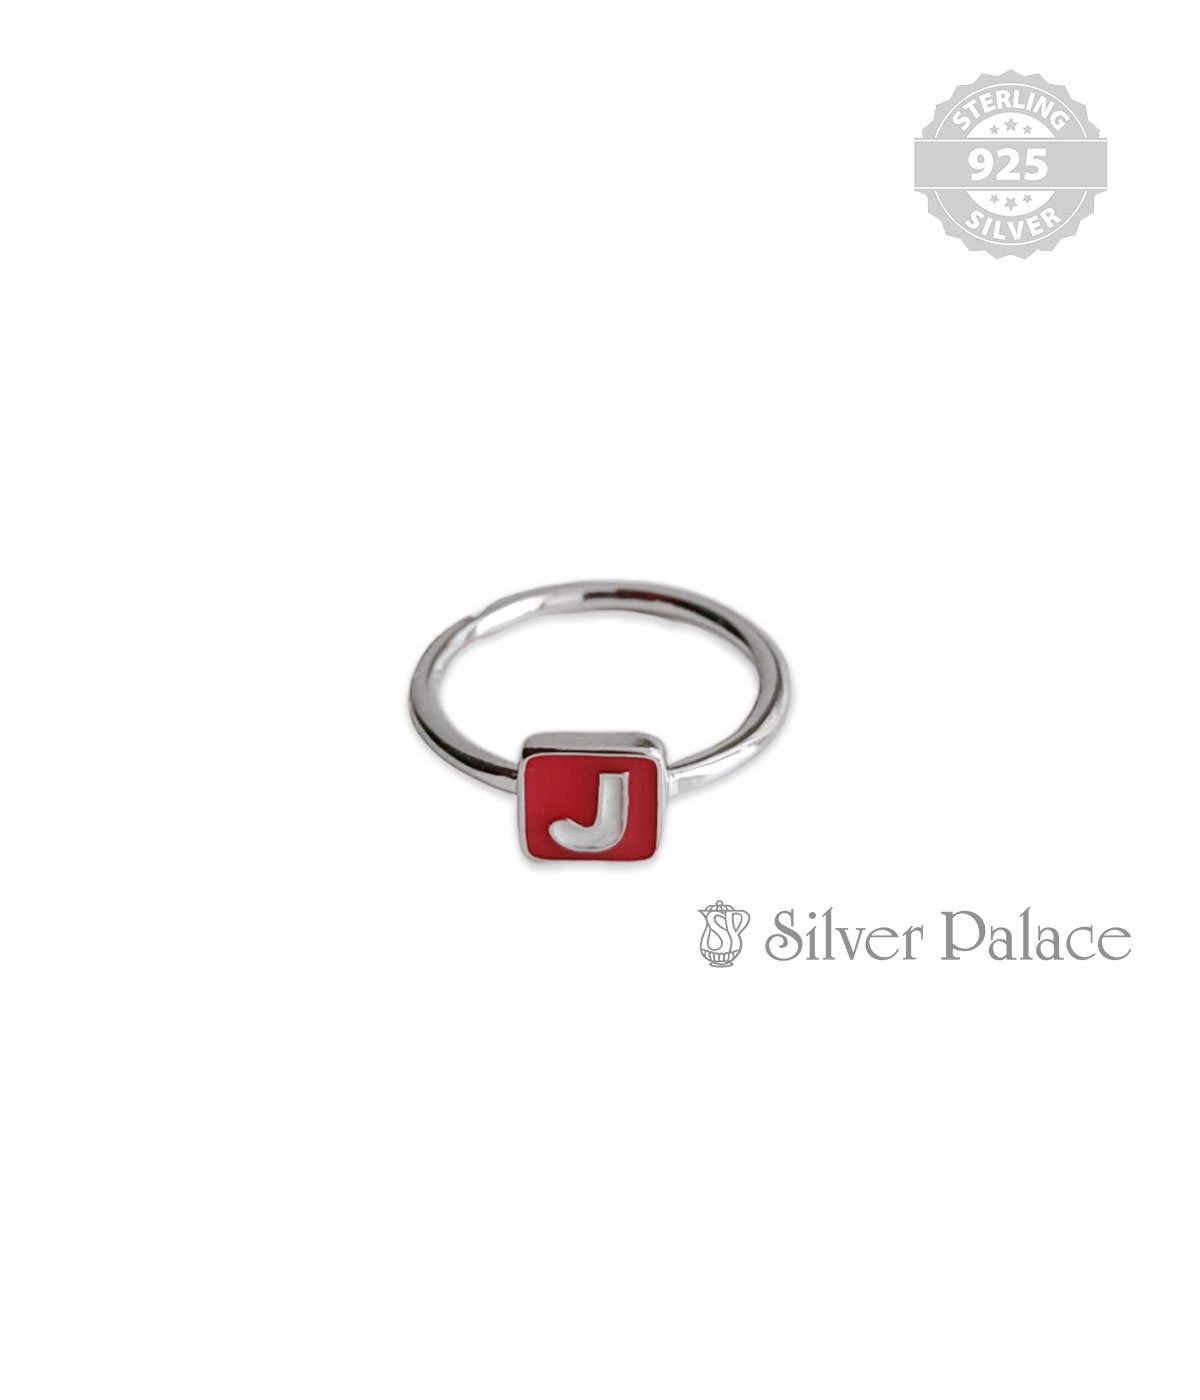 92.5 STERLING SILVER RED ENAMEL COATED ENGLISH ALPHABET J INITIAL KIDS RING